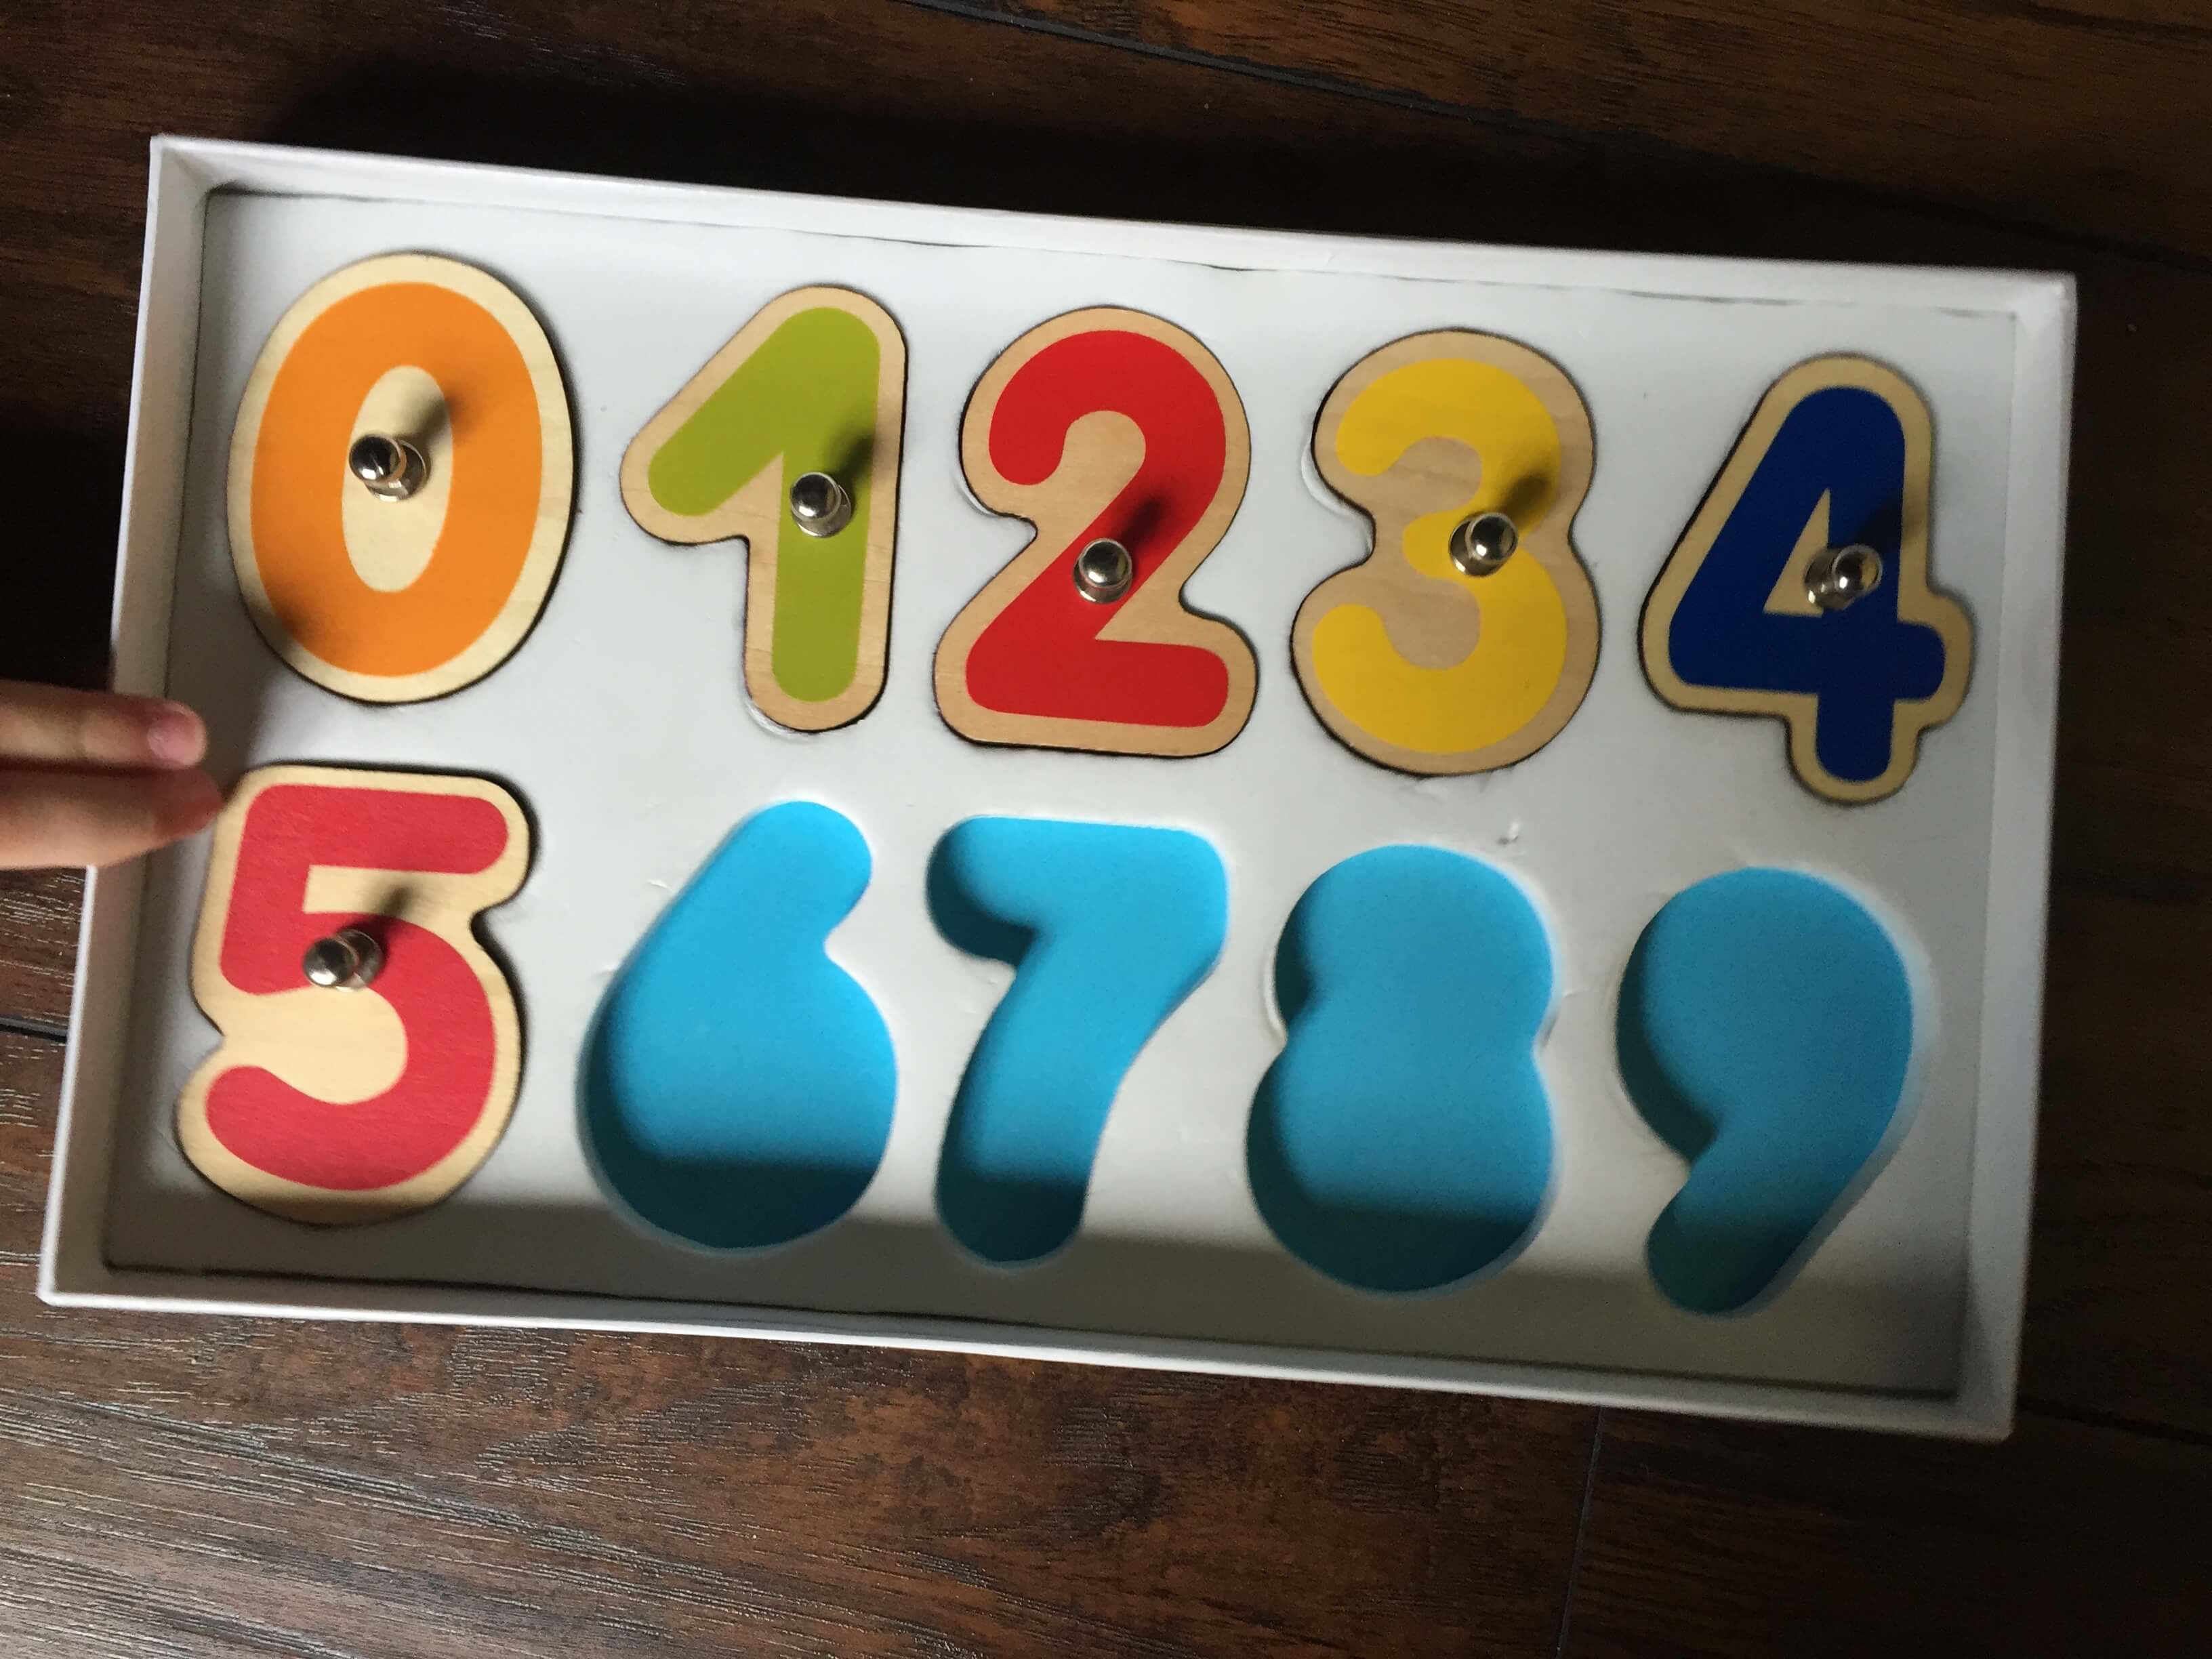 The connected toy “10 digits” : it interacts with your tablet